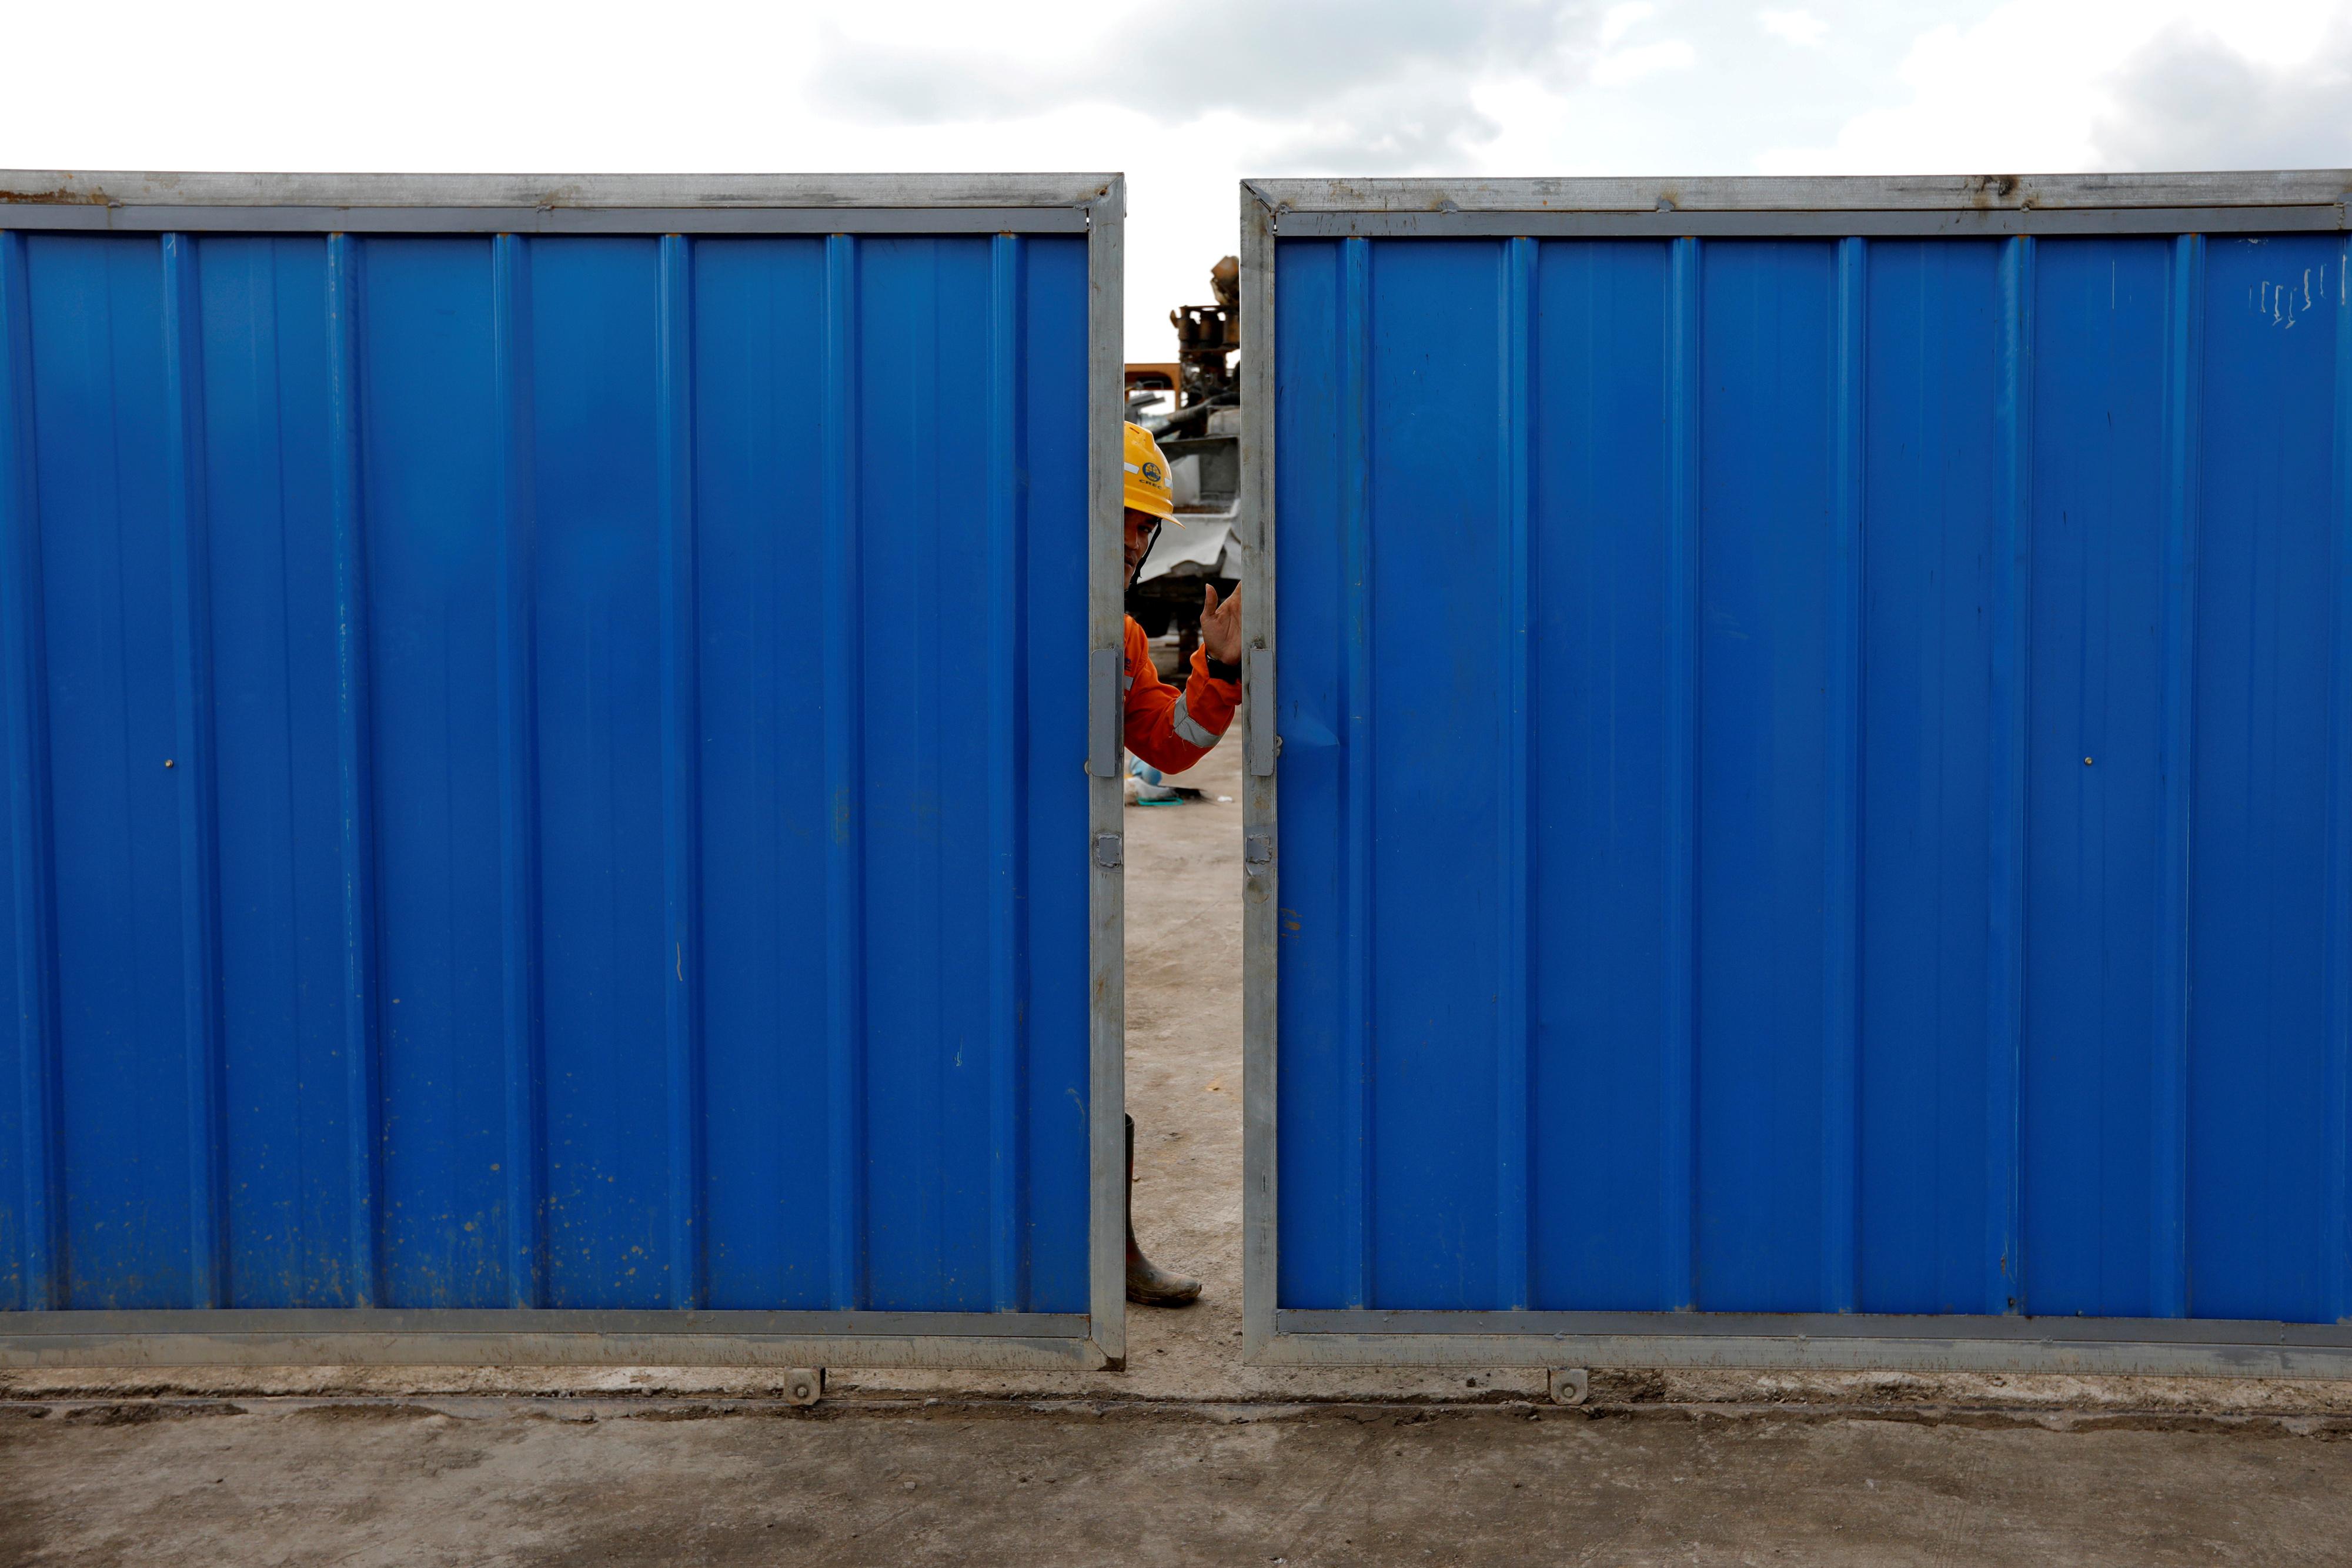 FILE PHOTO: A worker closes the gate at Walini tunnel construction site for Jakarta-Bandung High Speed Railway in West Bandung regency, West Java province, Indonesia, February 21, 2019. REUTERS/Willy Kurniawan/File Photo